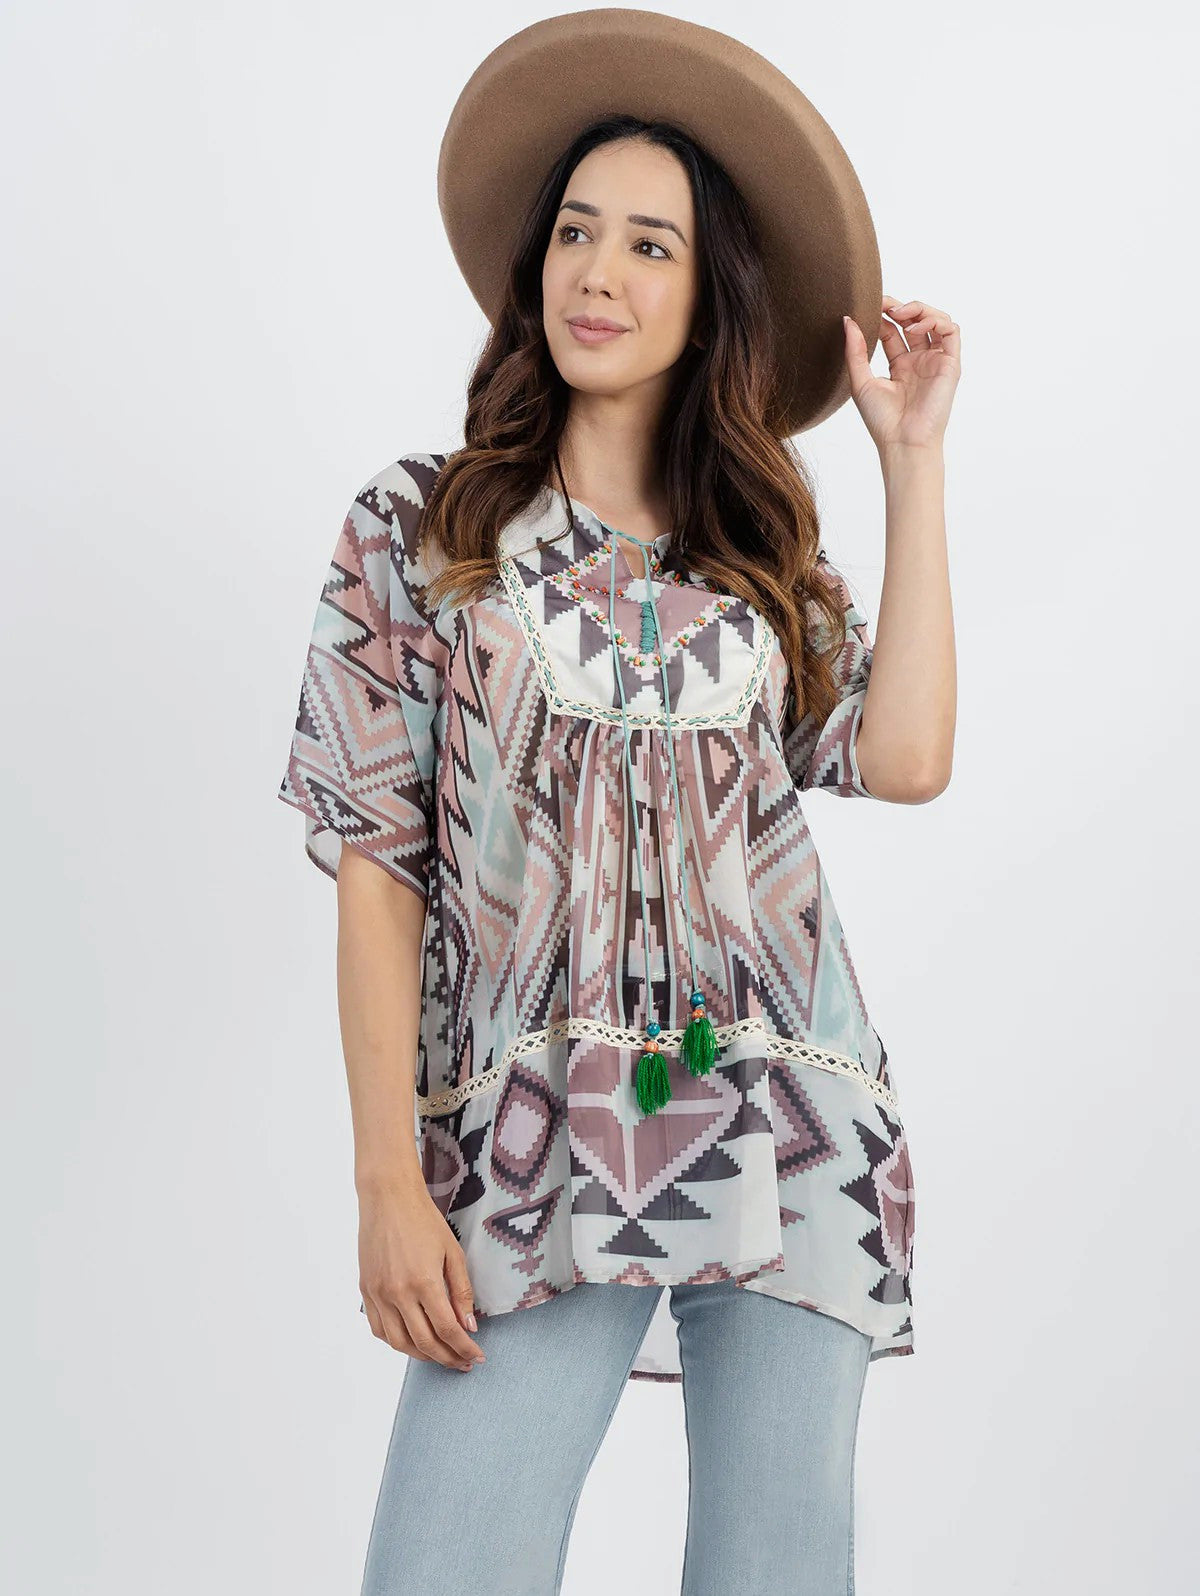 Women's Hand Seeded Beads “Aztec” Graphic Short Sleeve Blouse - Cowgirl Wear